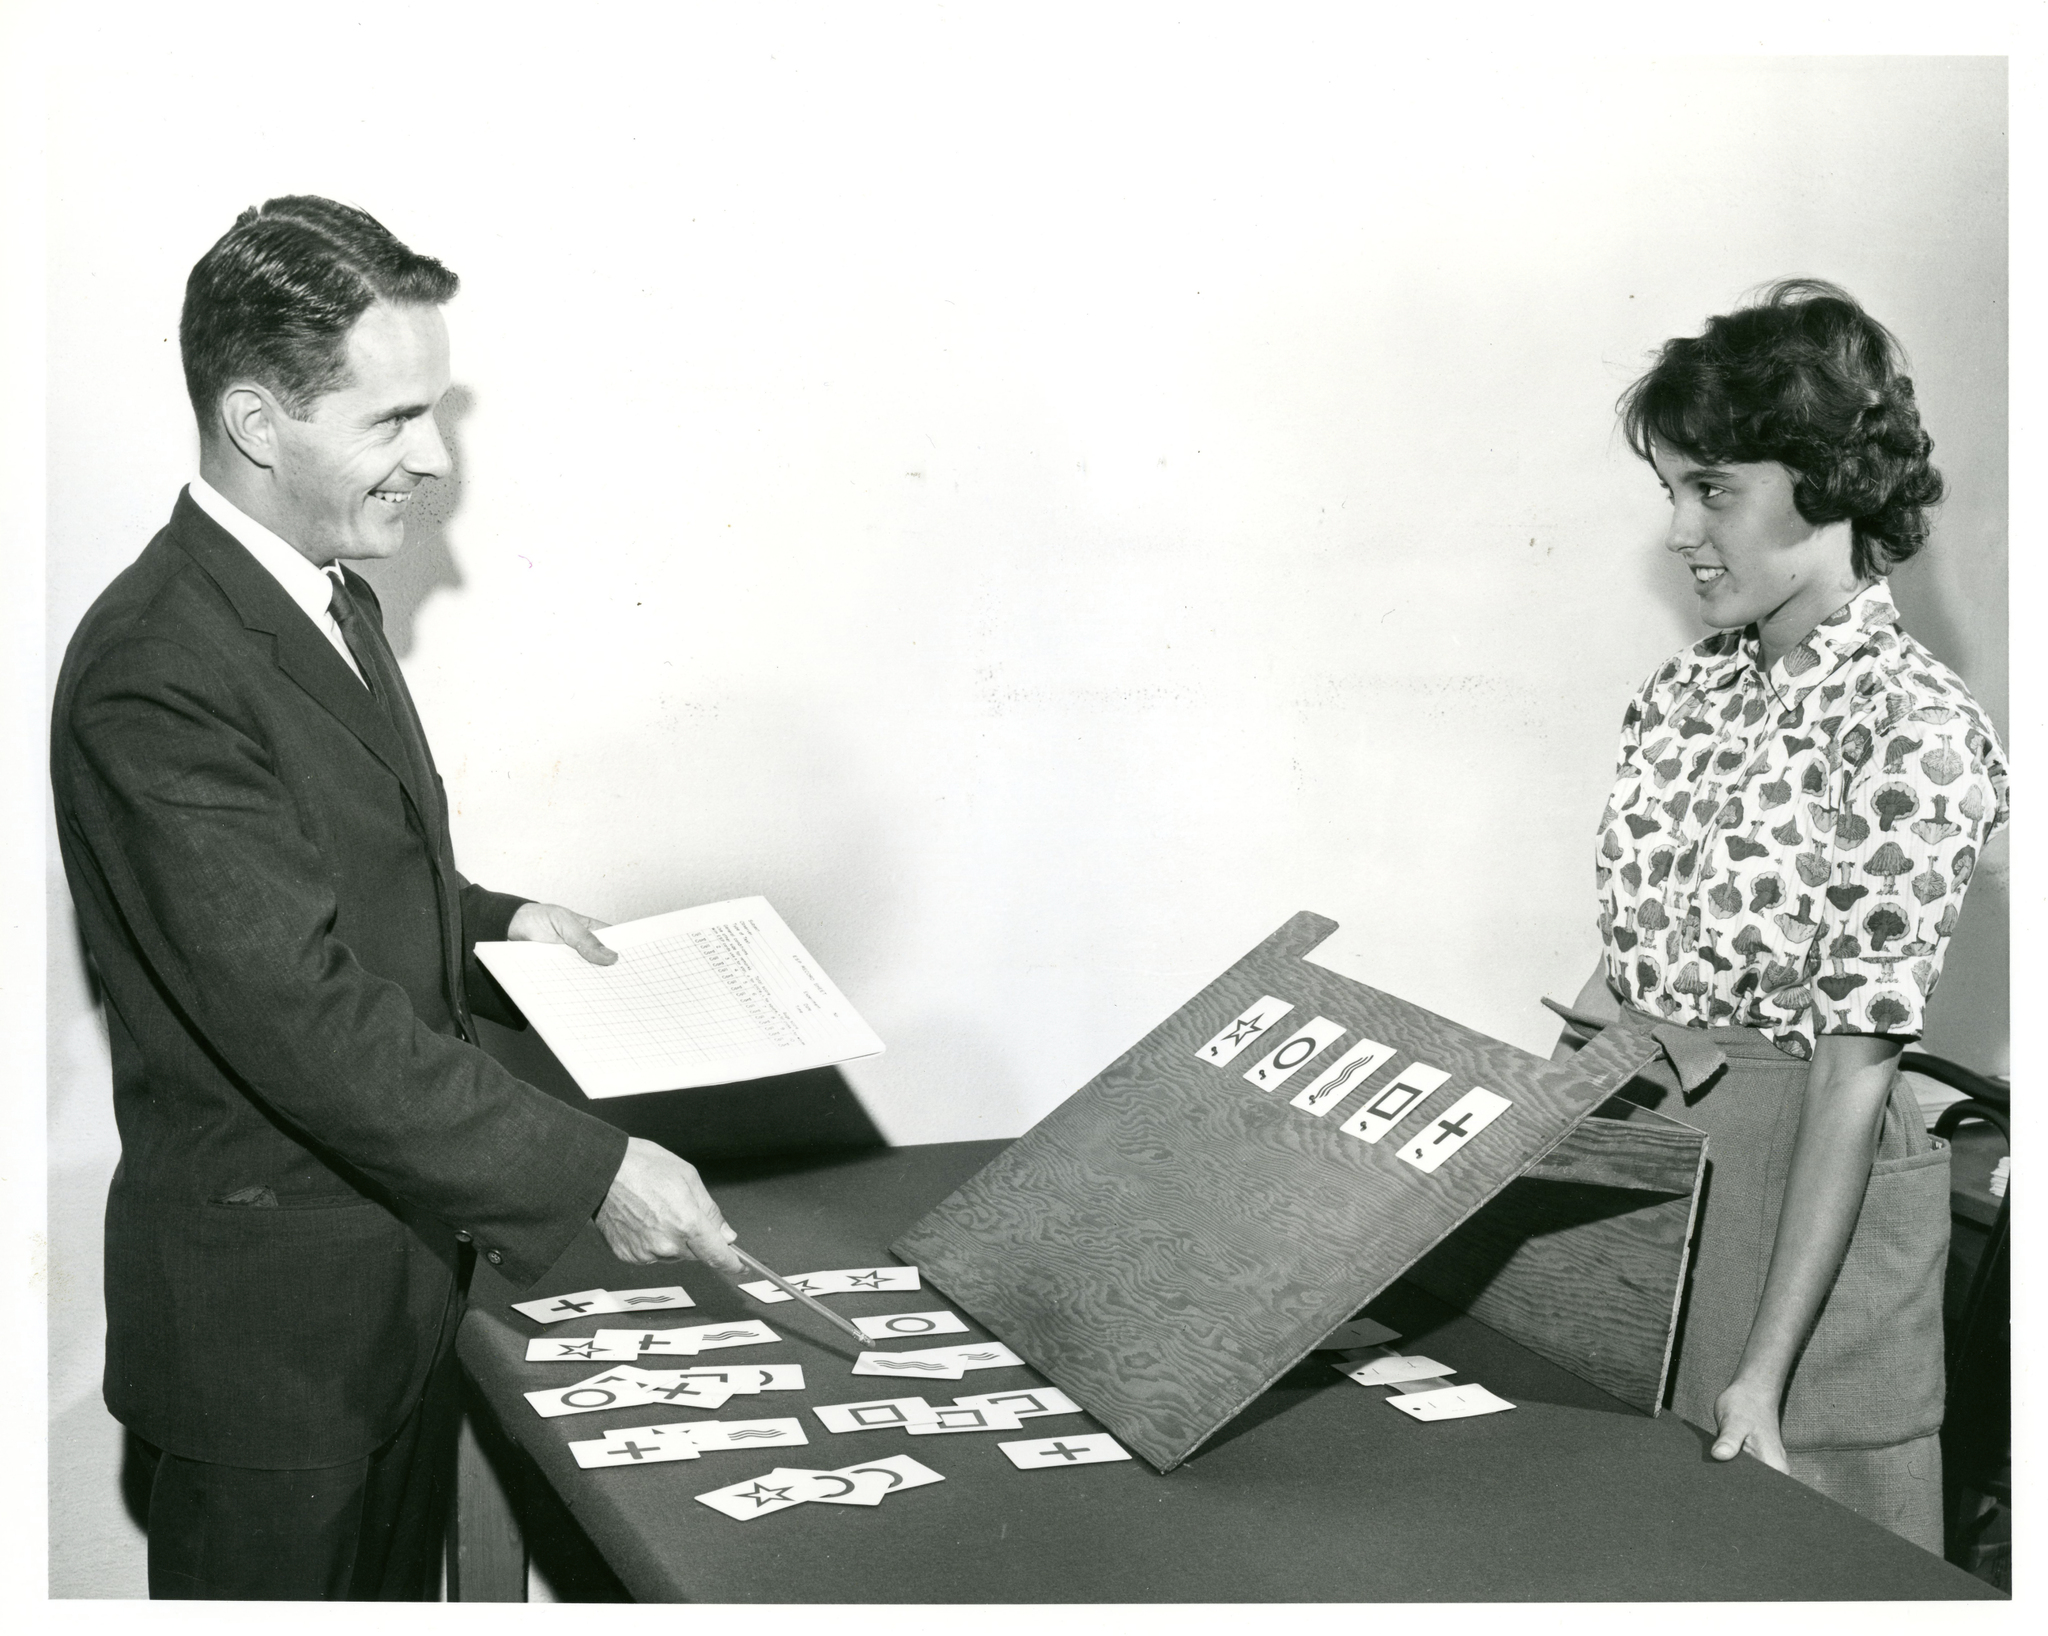 Man and woman stand around Zener Card display